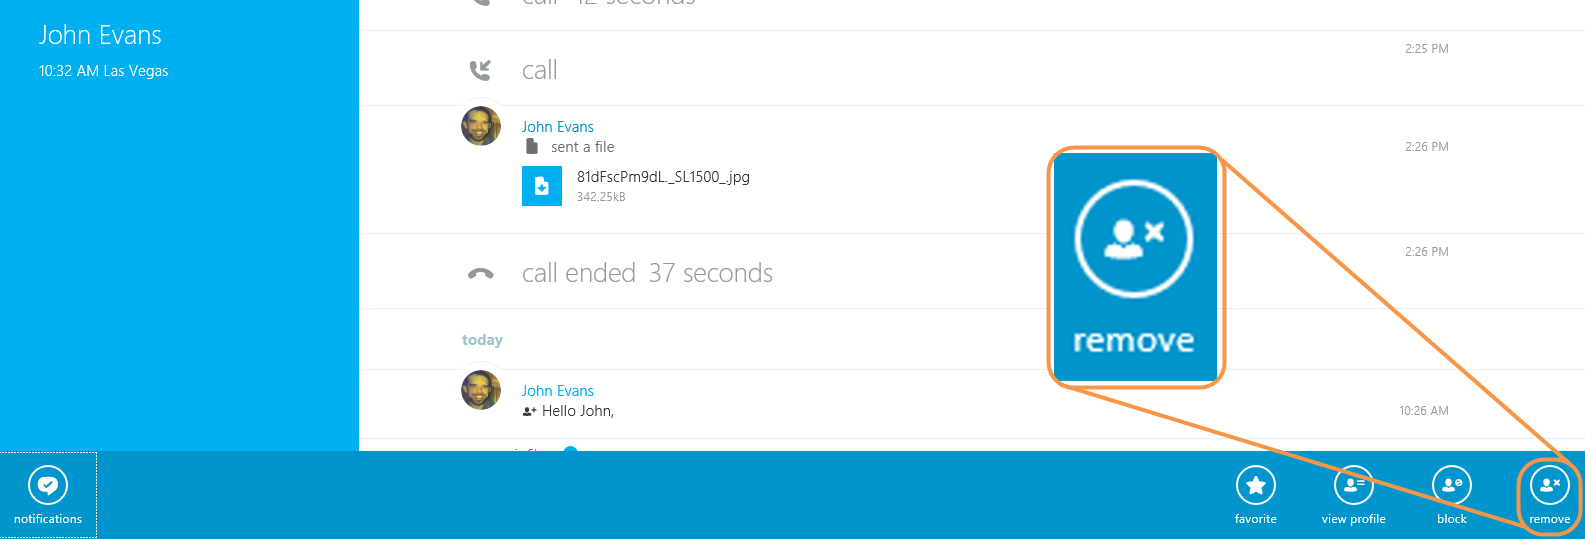 how to add contacts skype windows 10